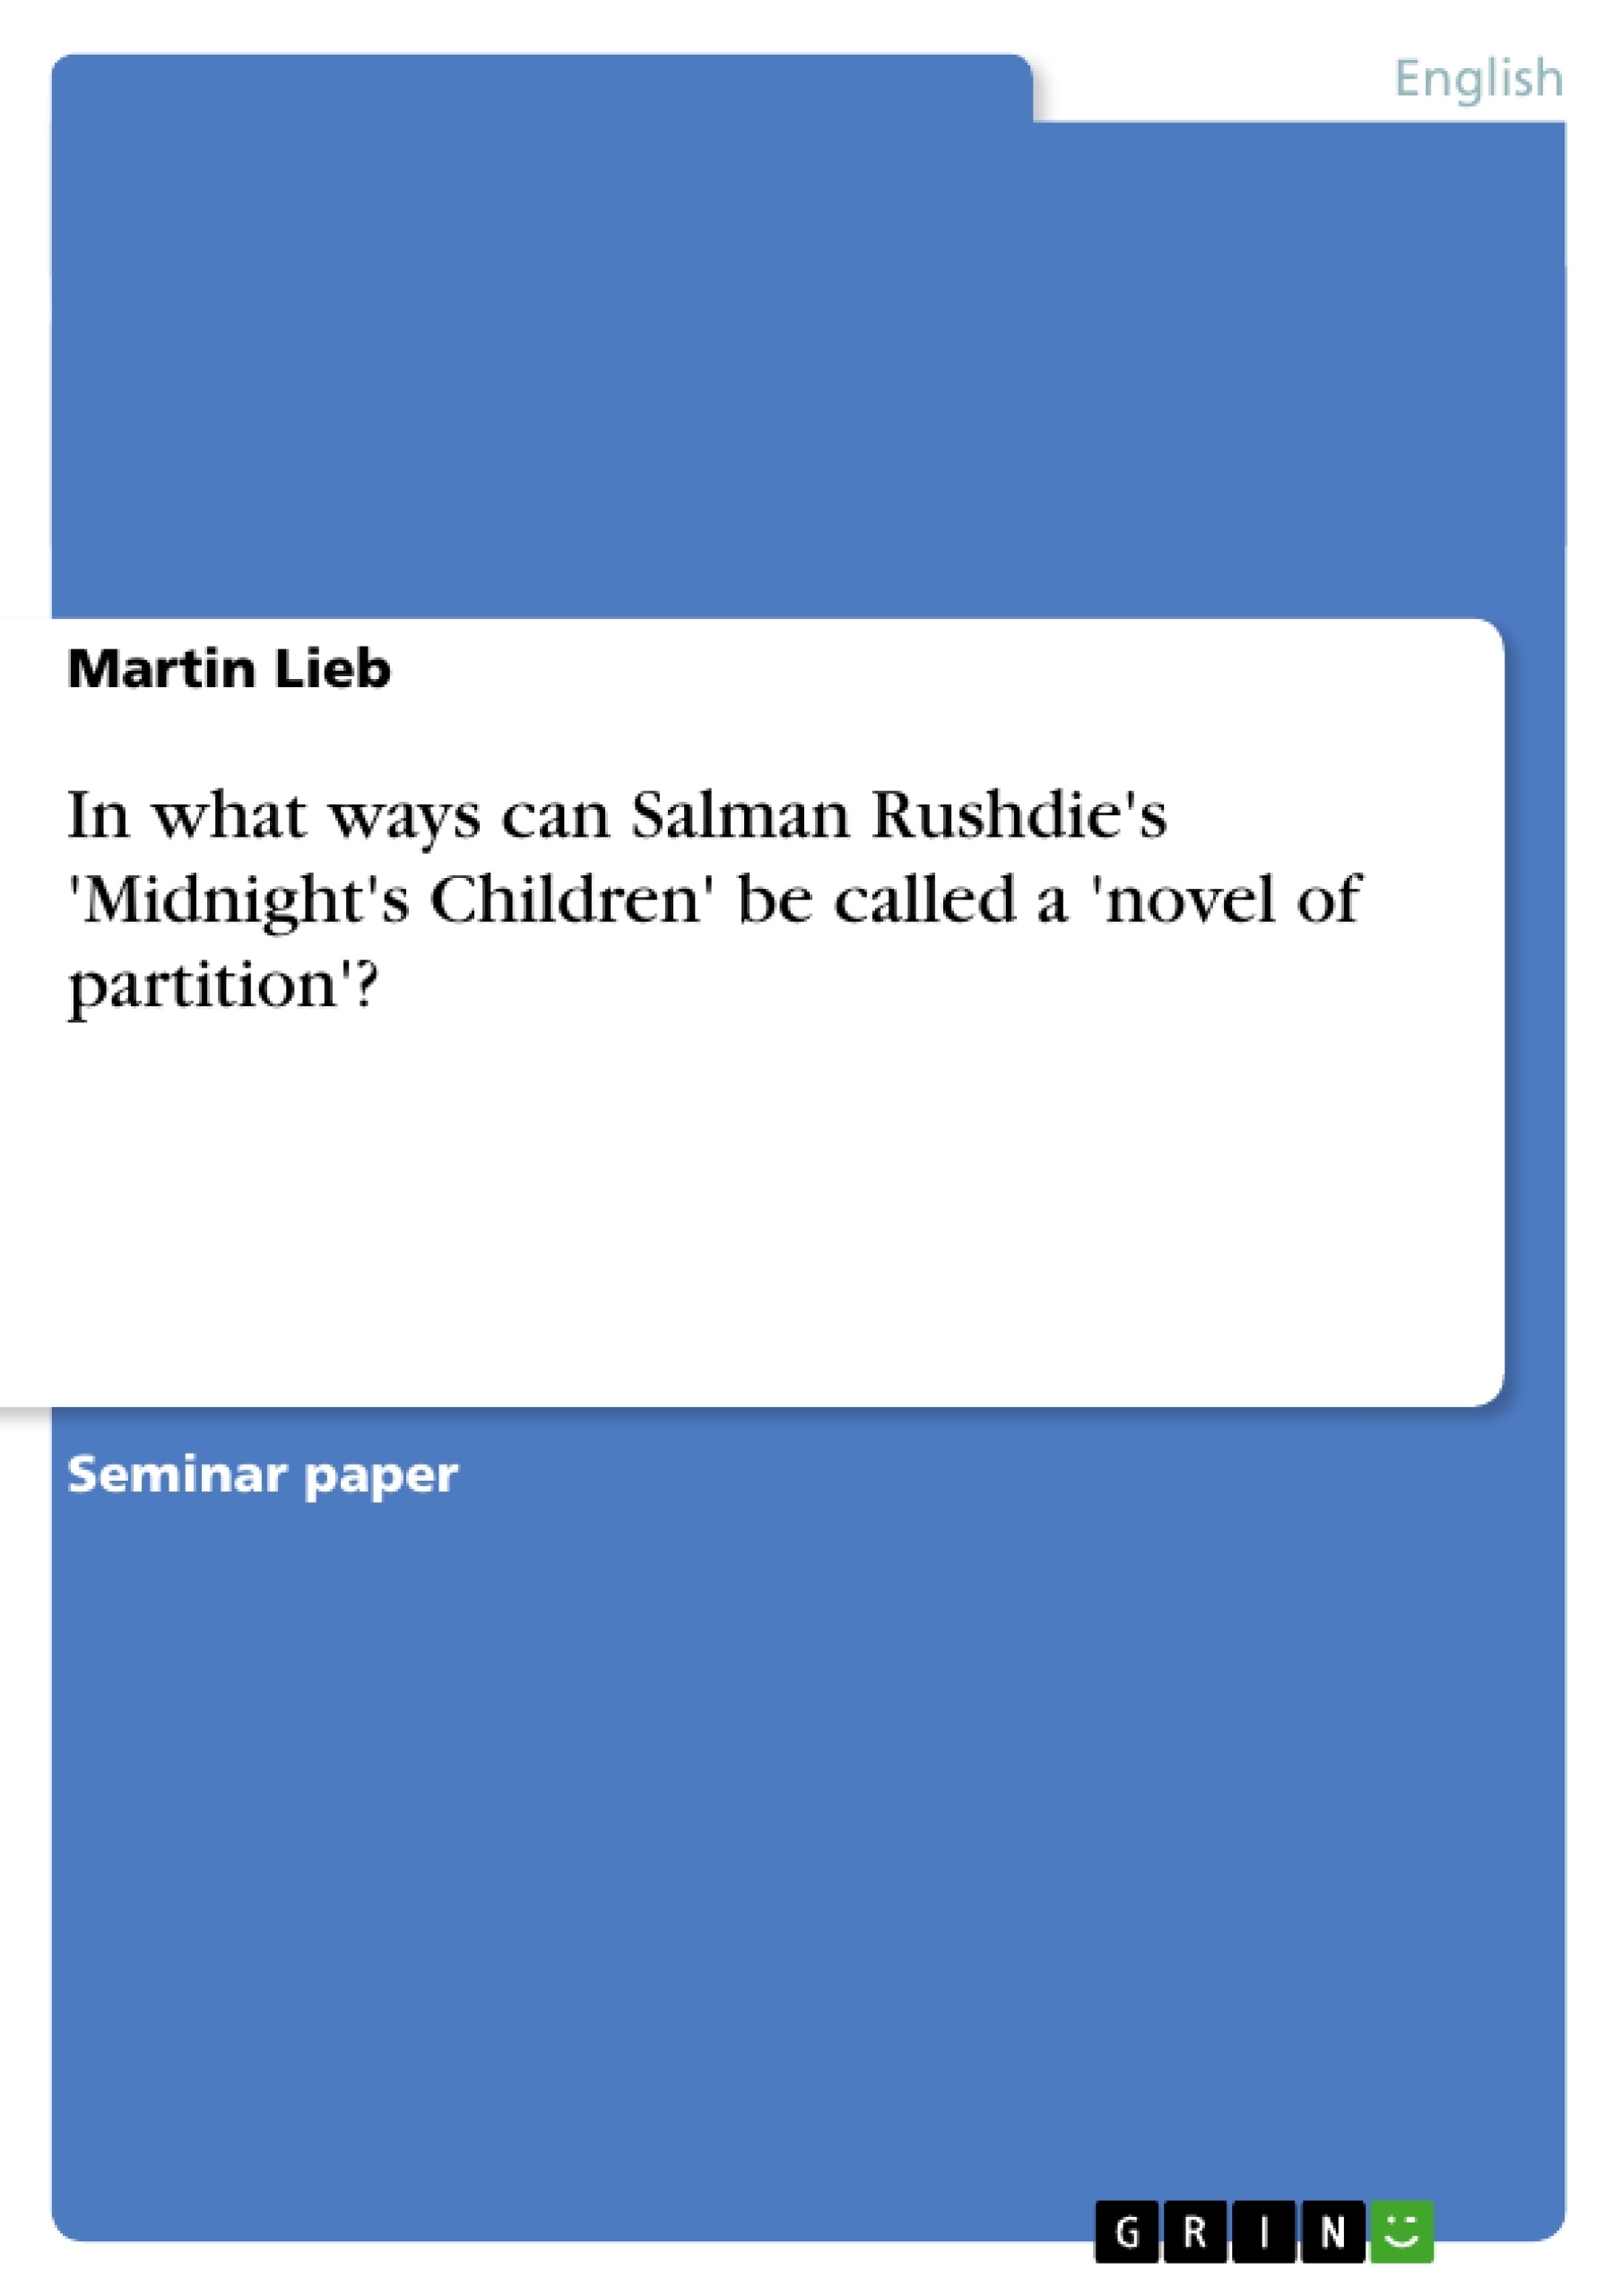 Titre: In what ways can Salman Rushdie's 'Midnight's Children' be called a 'novel of partition'?